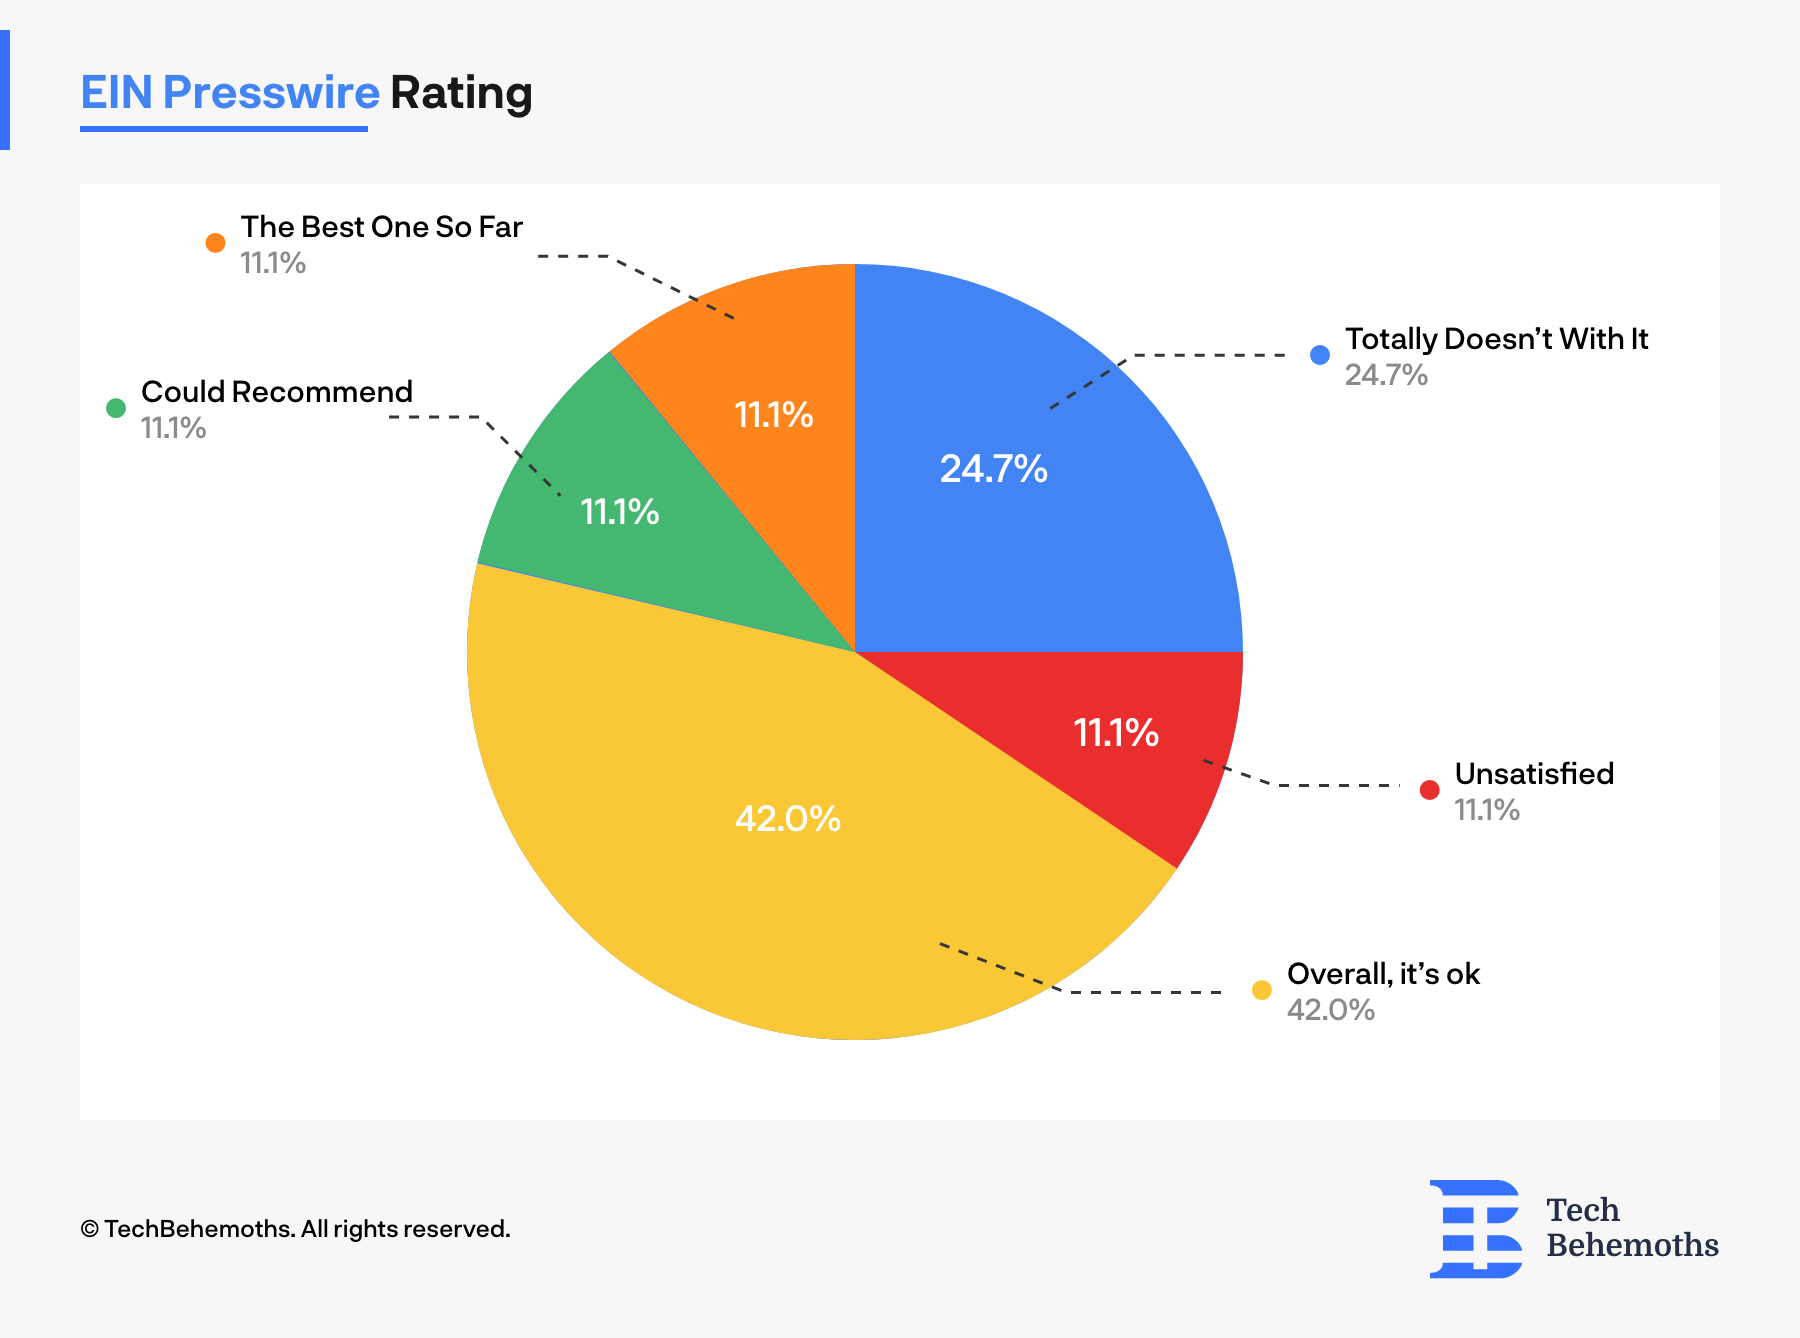 11.1% of IT companies and digital agencies consider that EIN Presswire is the best so far